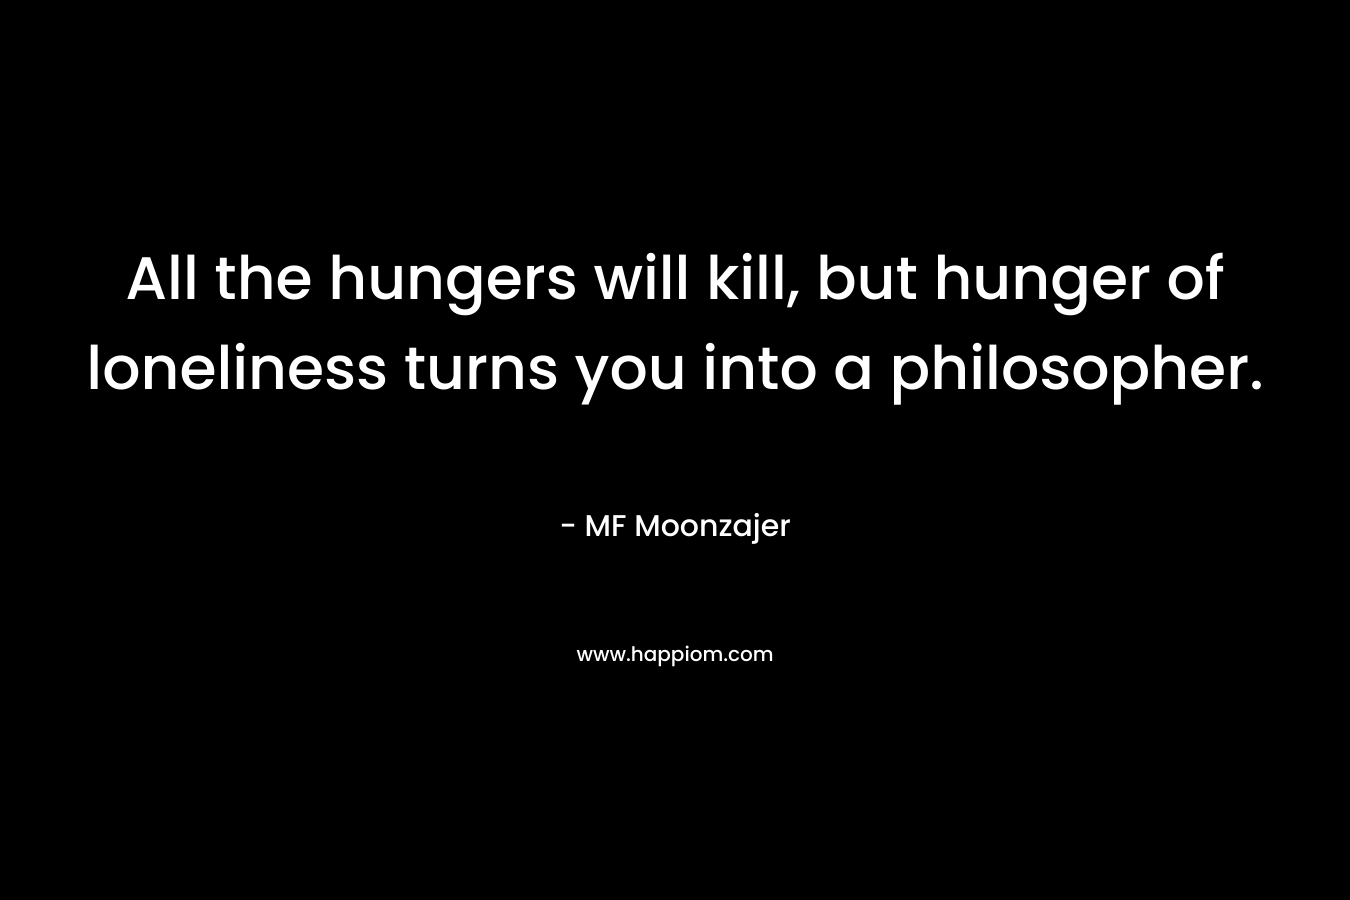 All the hungers will kill, but hunger of loneliness turns you into a philosopher.